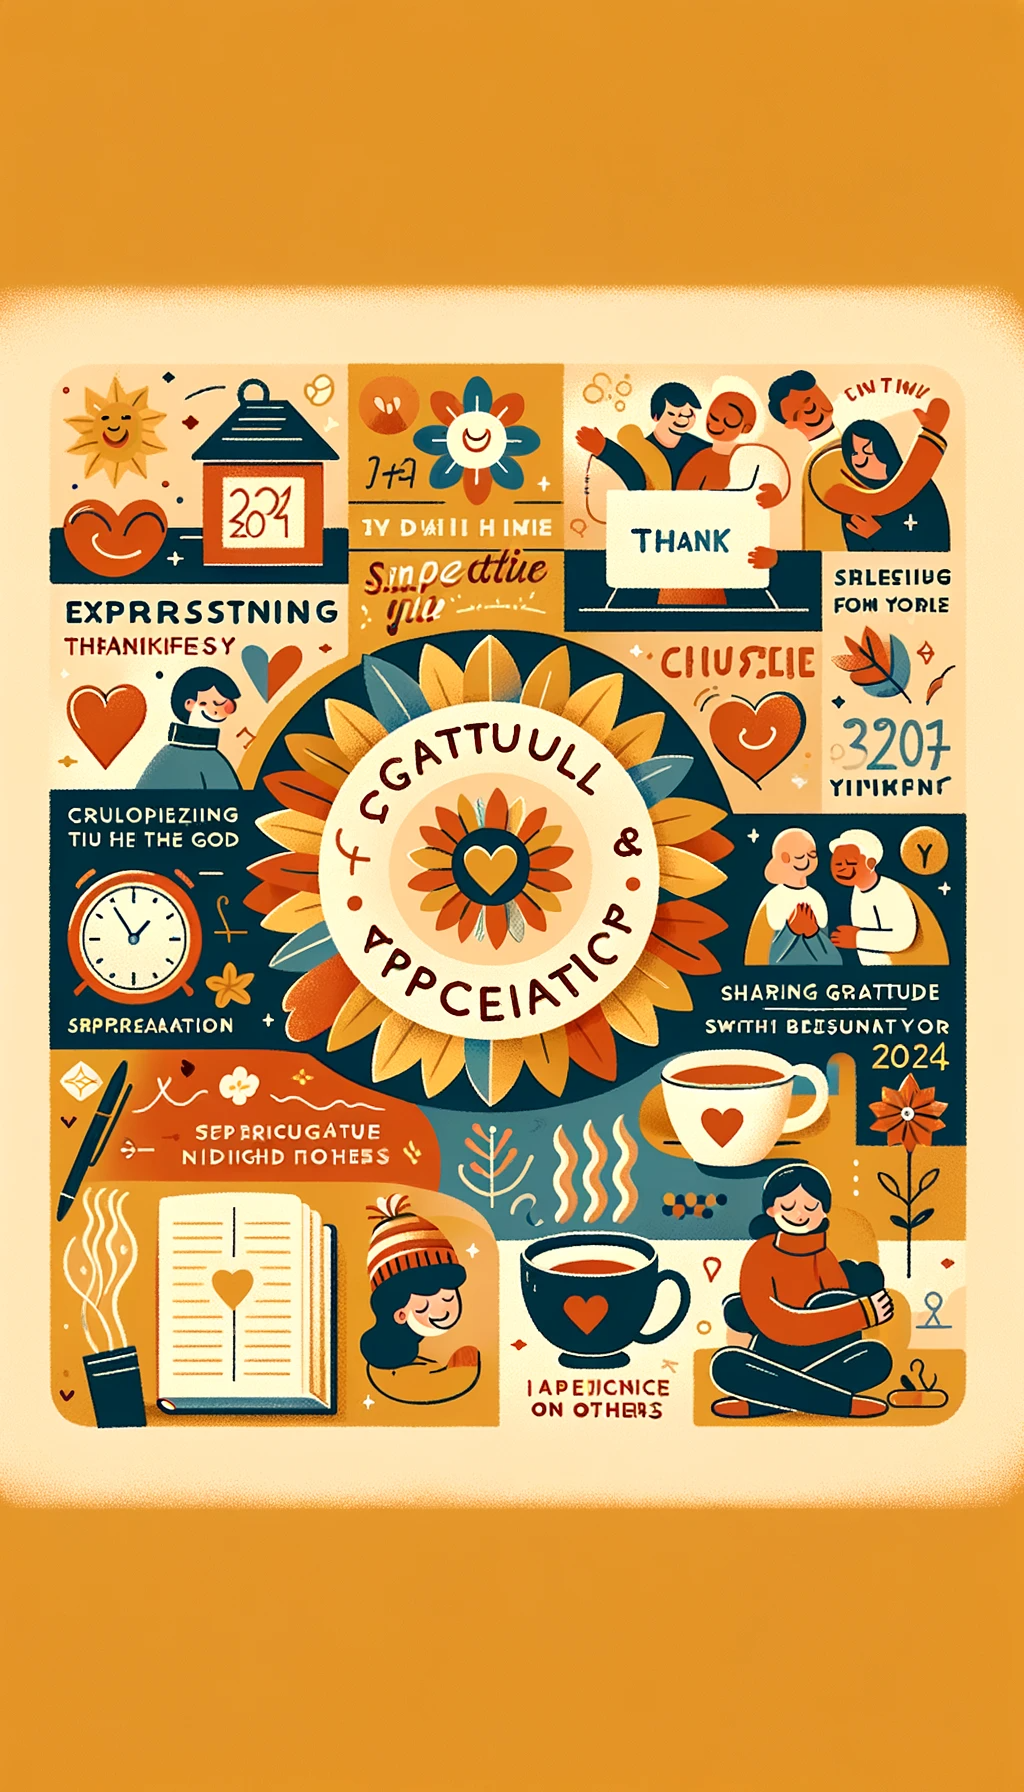 New Year Wishes & Images for 2024 Gratitude and Appreciation